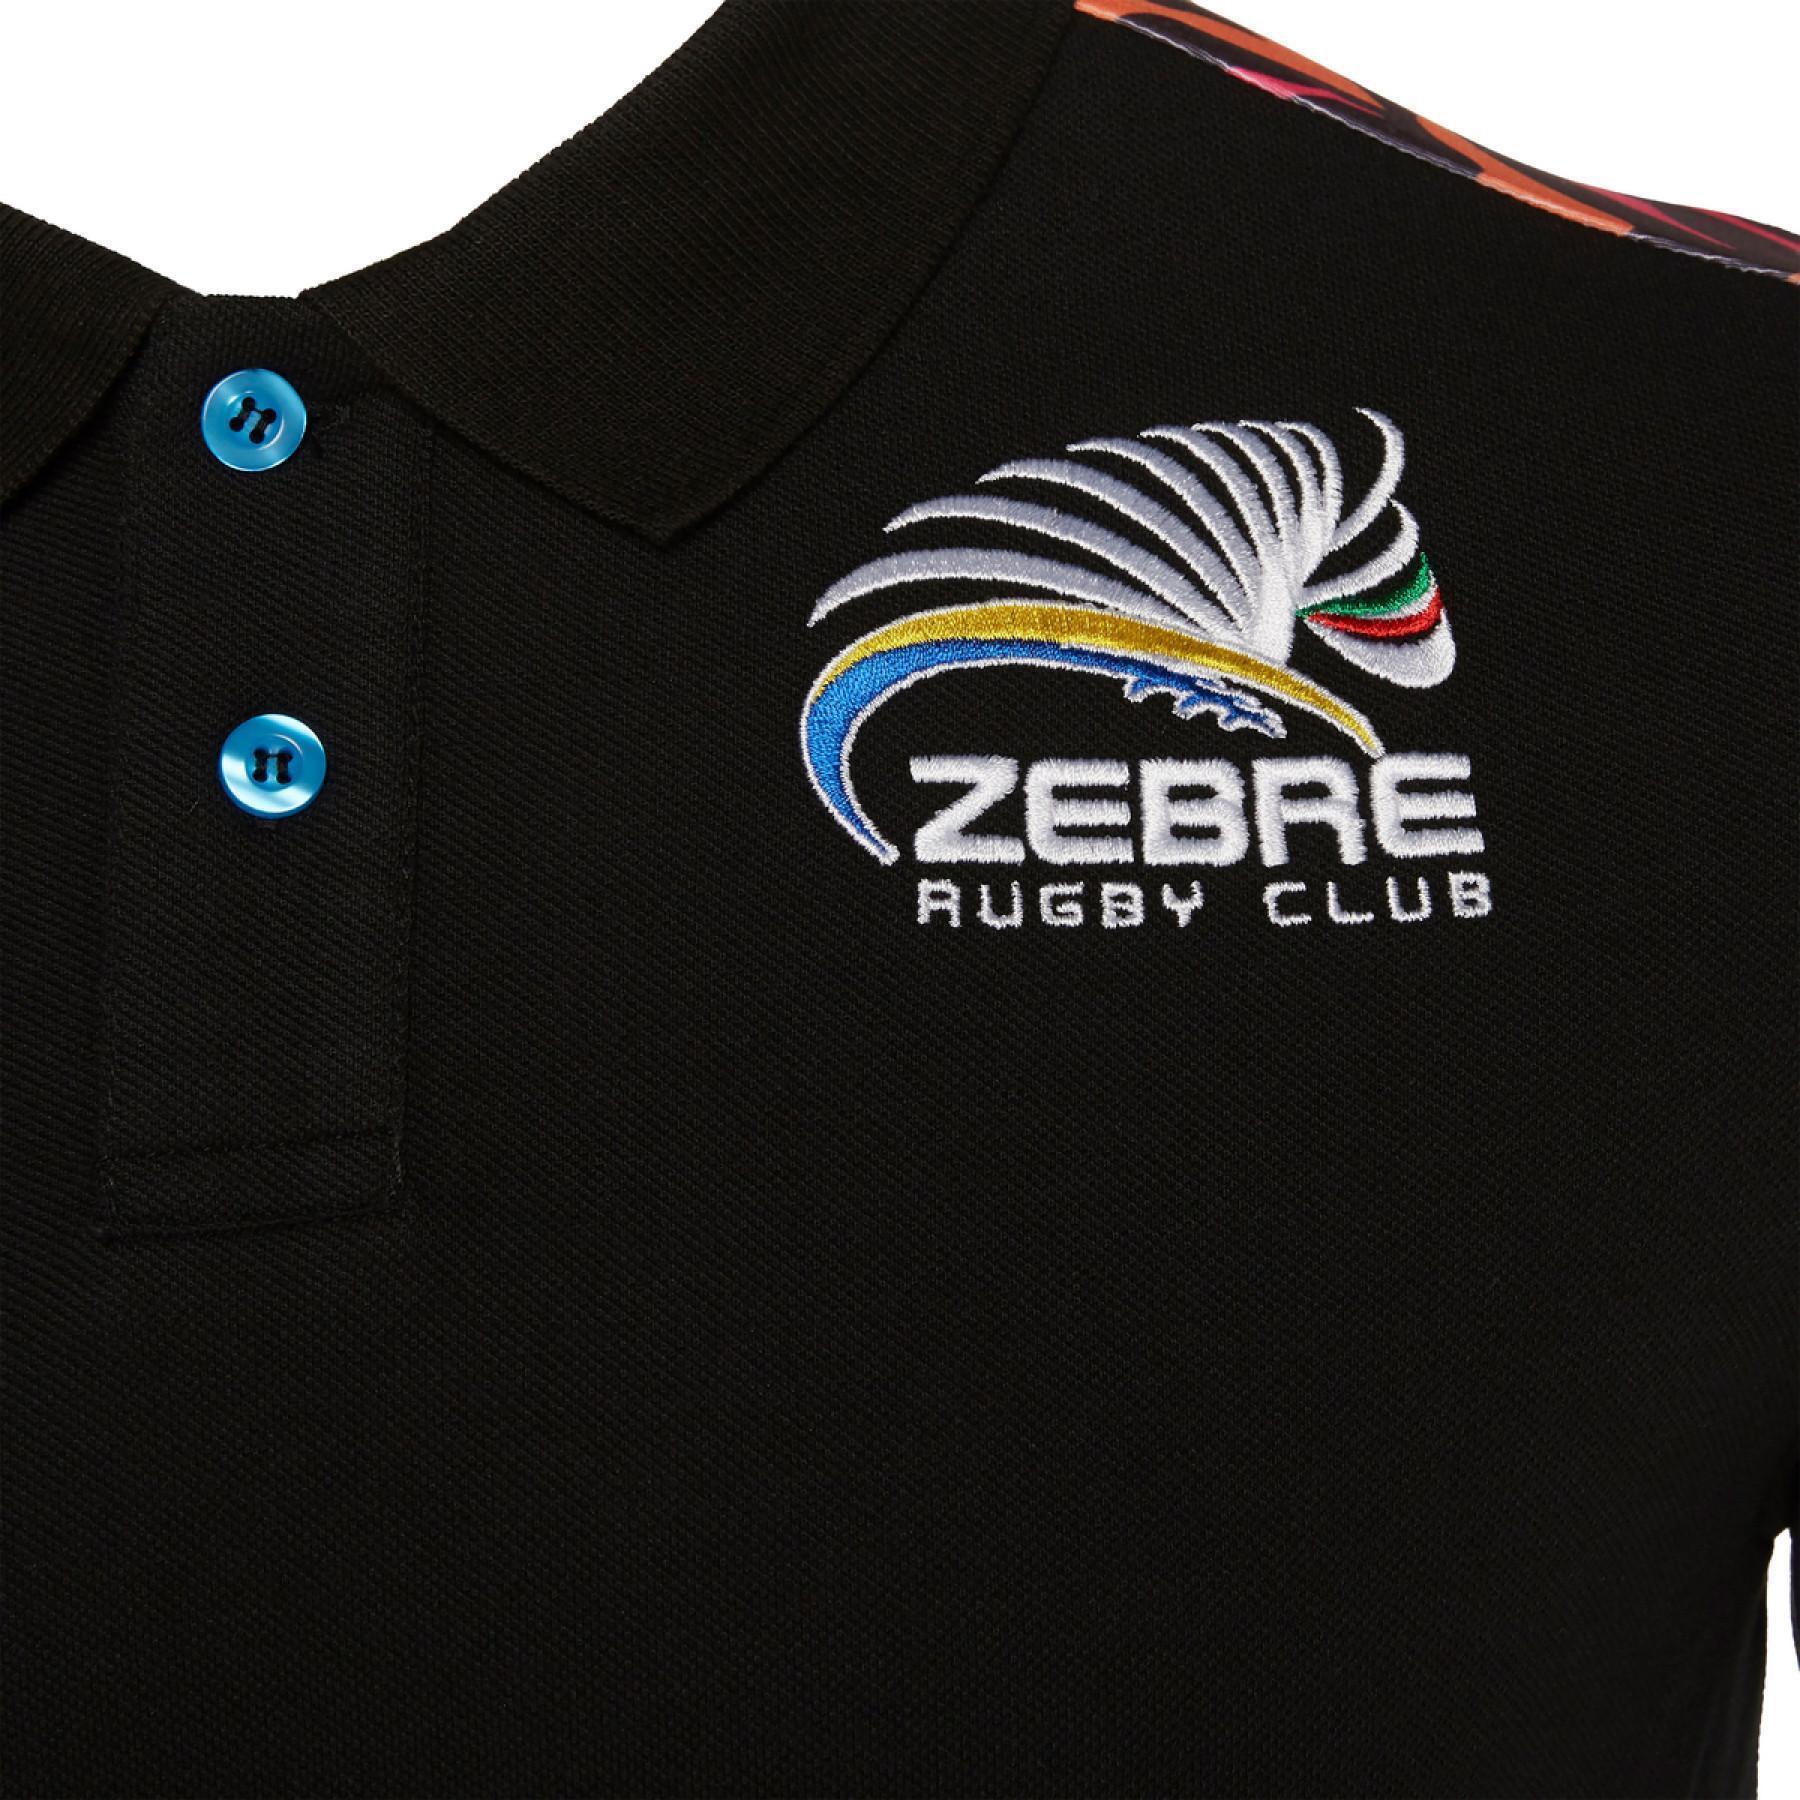 Polo voyage zebre rugby 2019/2020